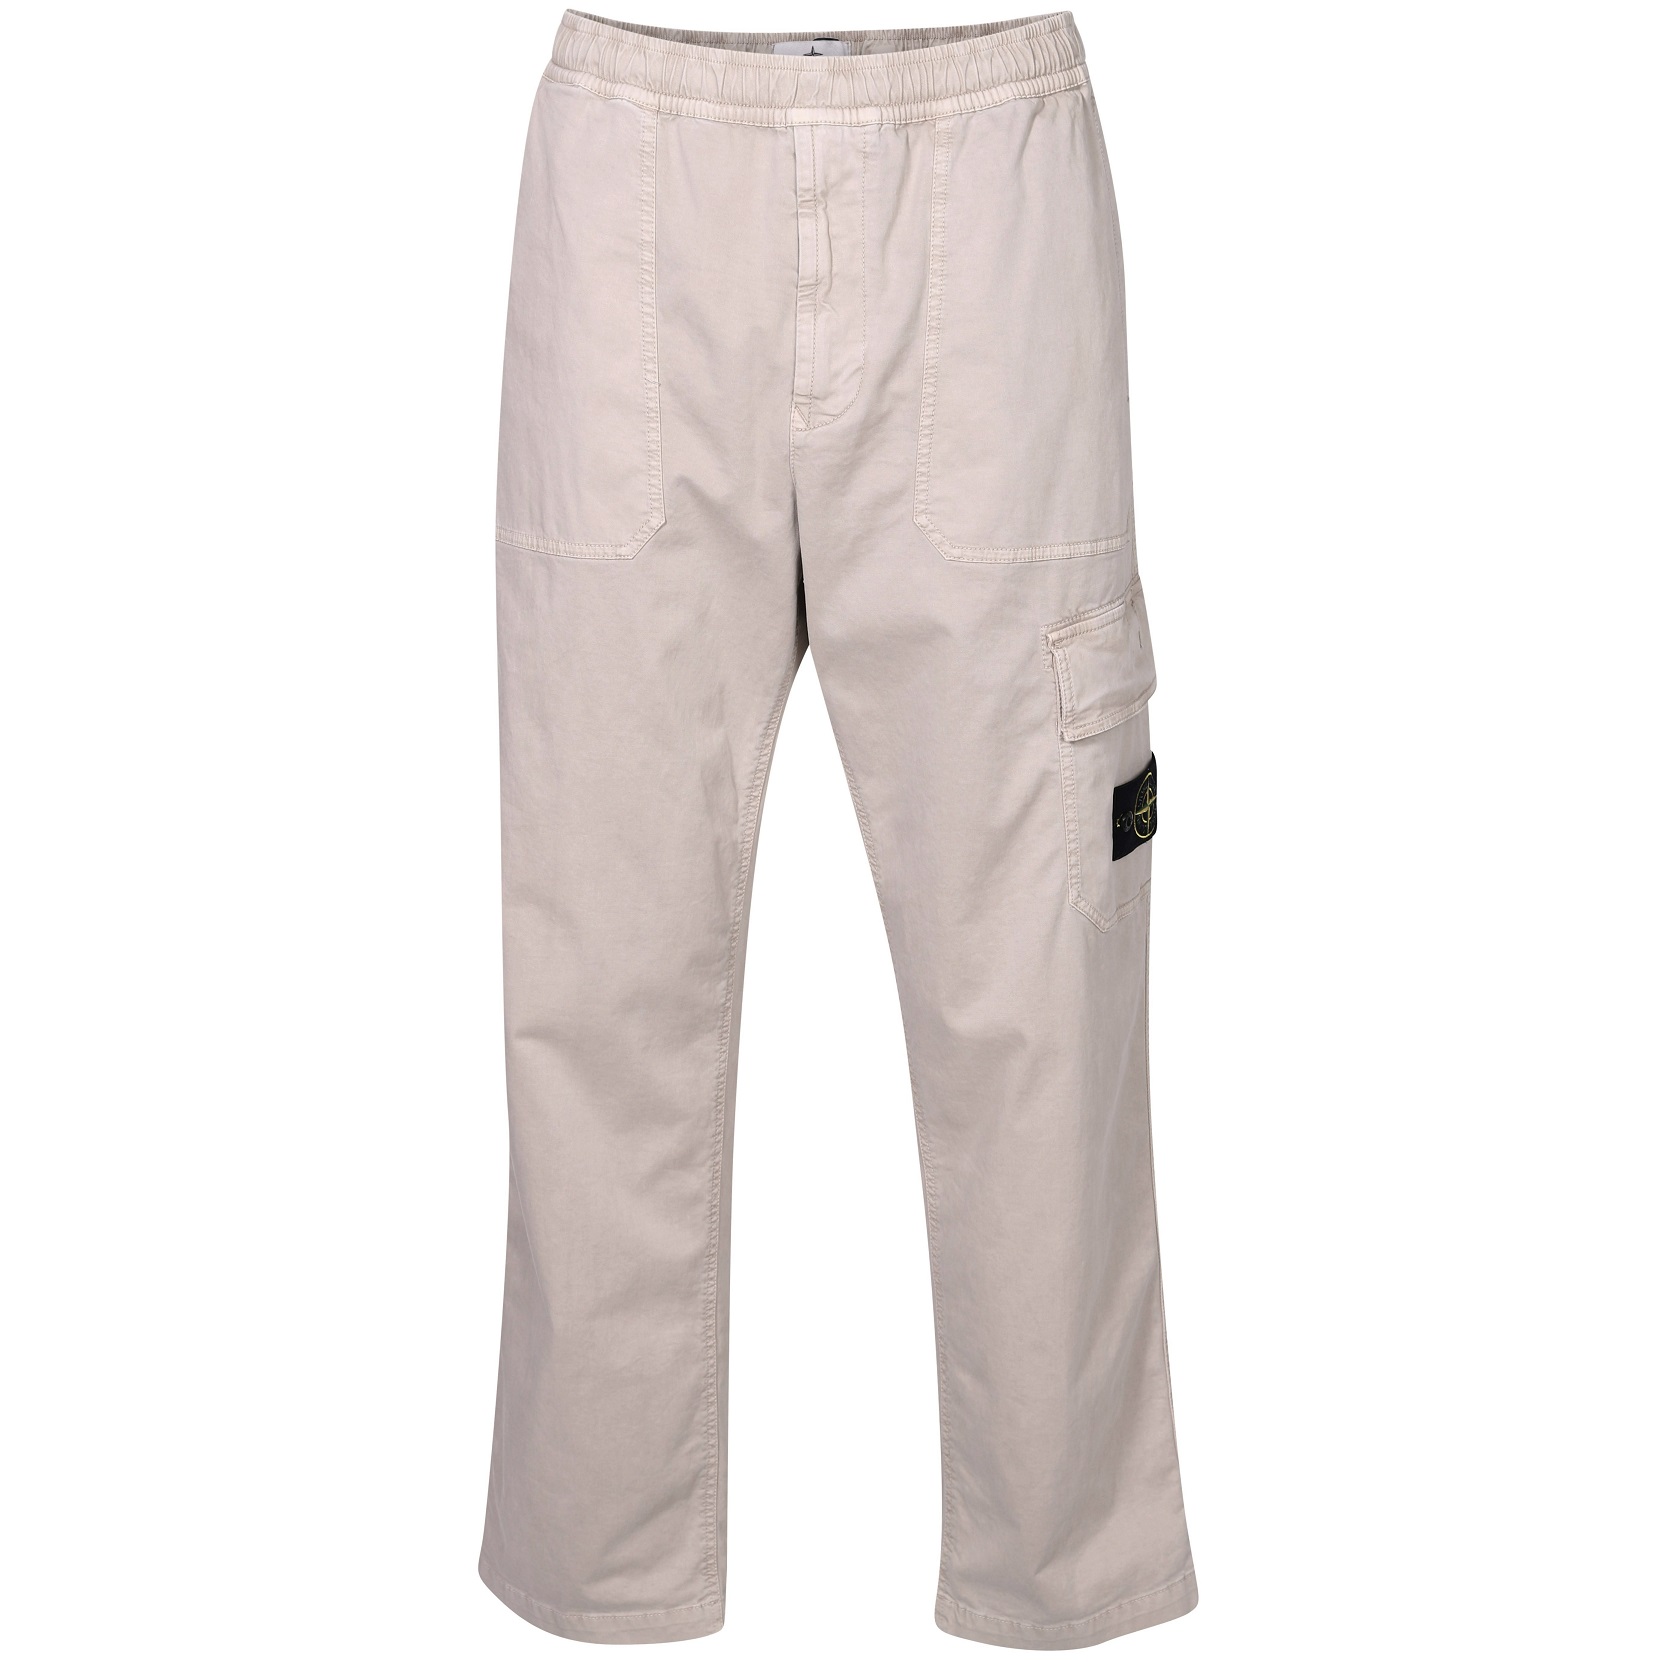 STONE ISLAND Loose Cargo Pant in Washed Dove Grey 31